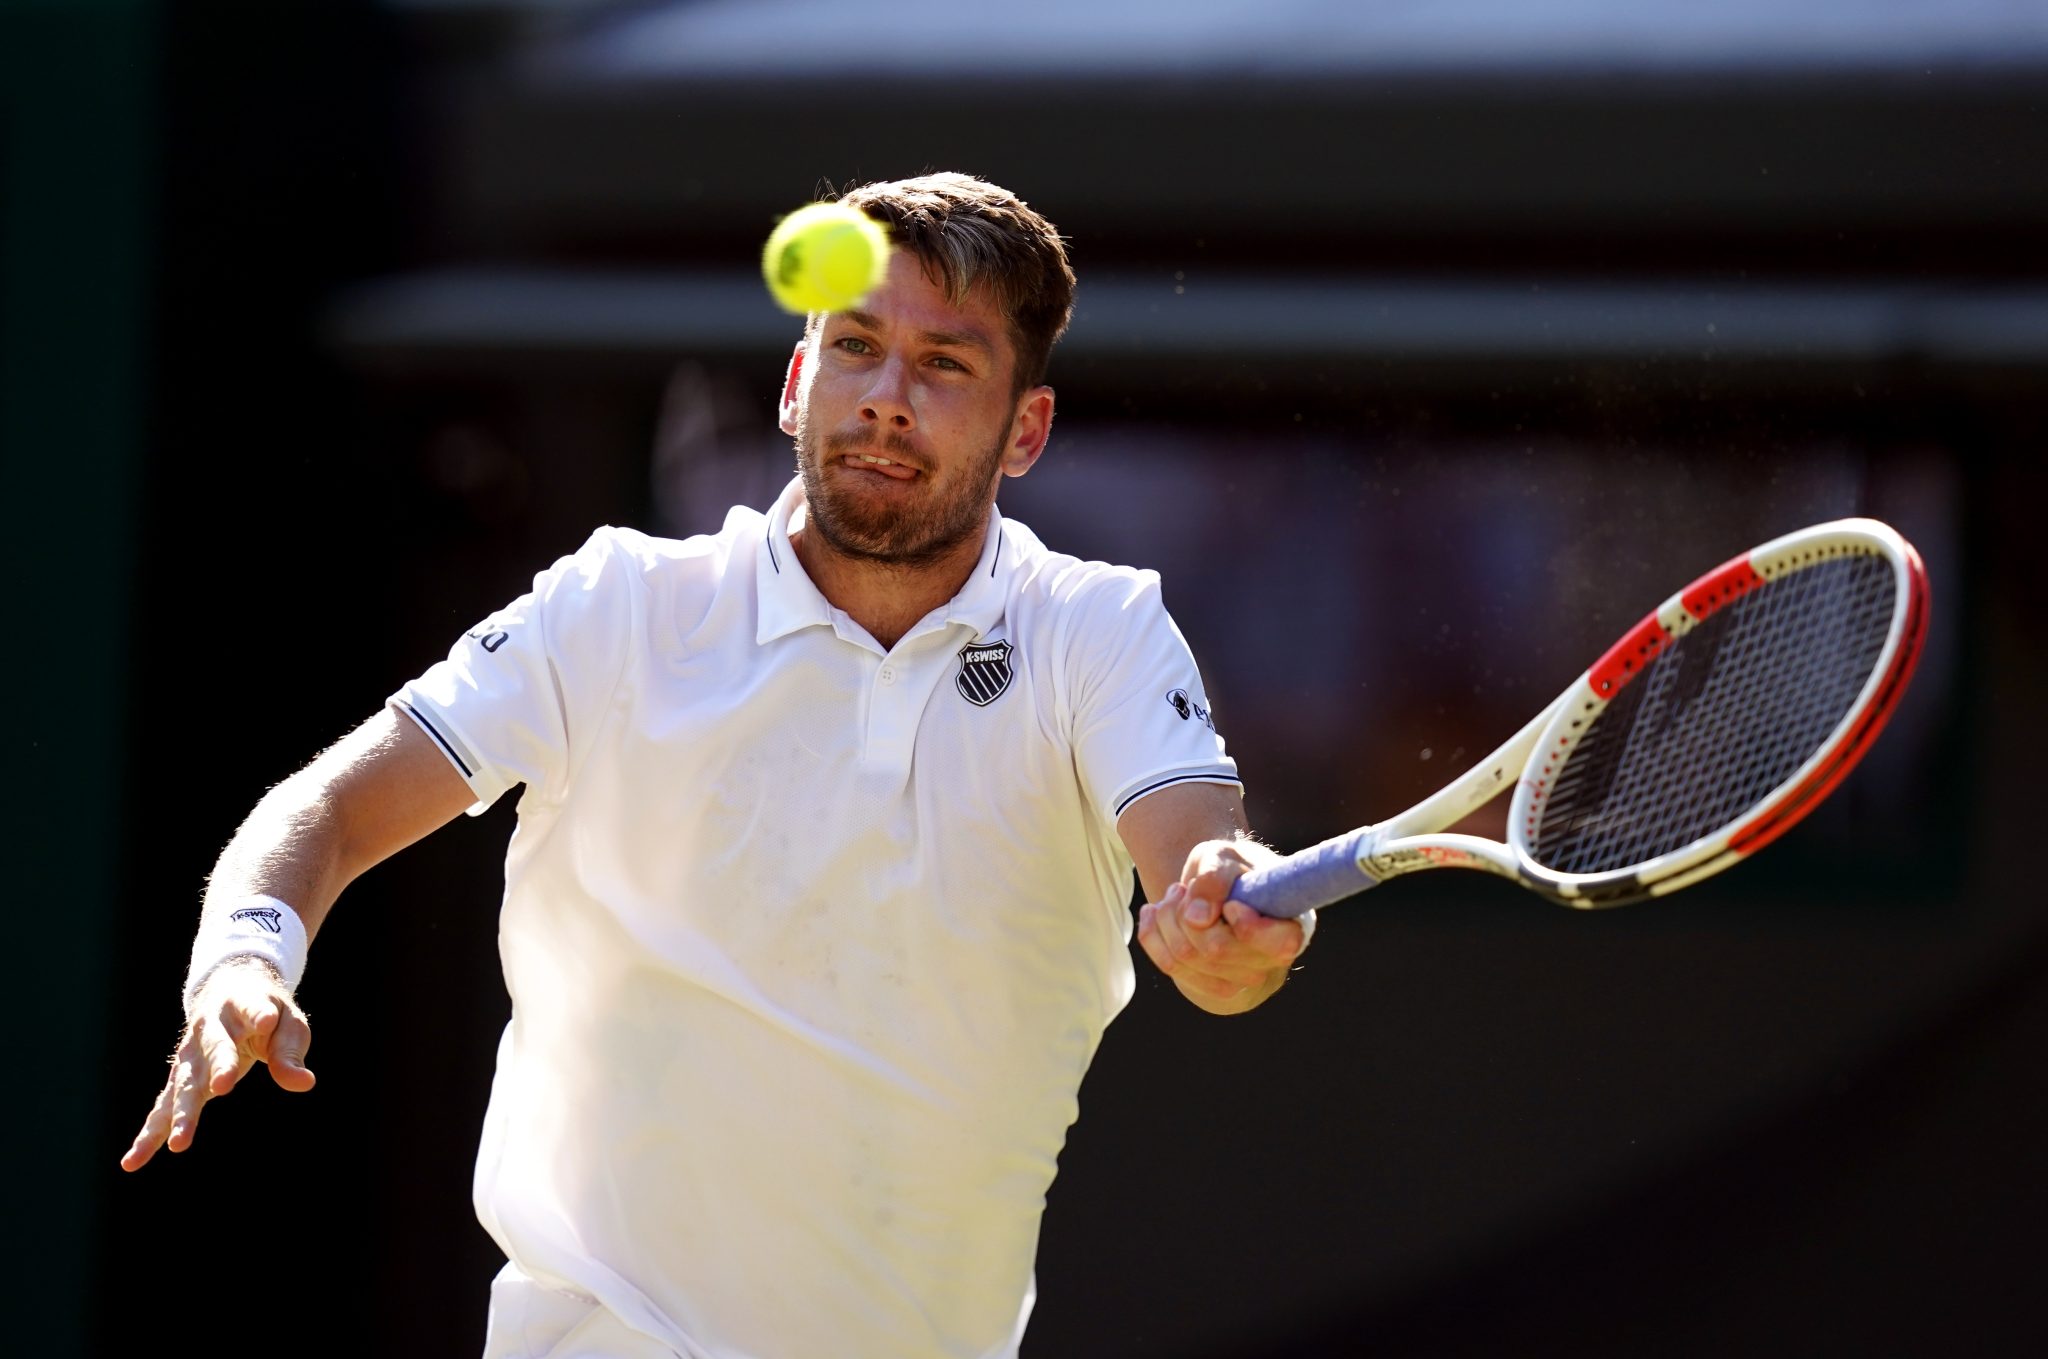 Cameron Norrie knocked out of Wimbledon by Chris Eubanks